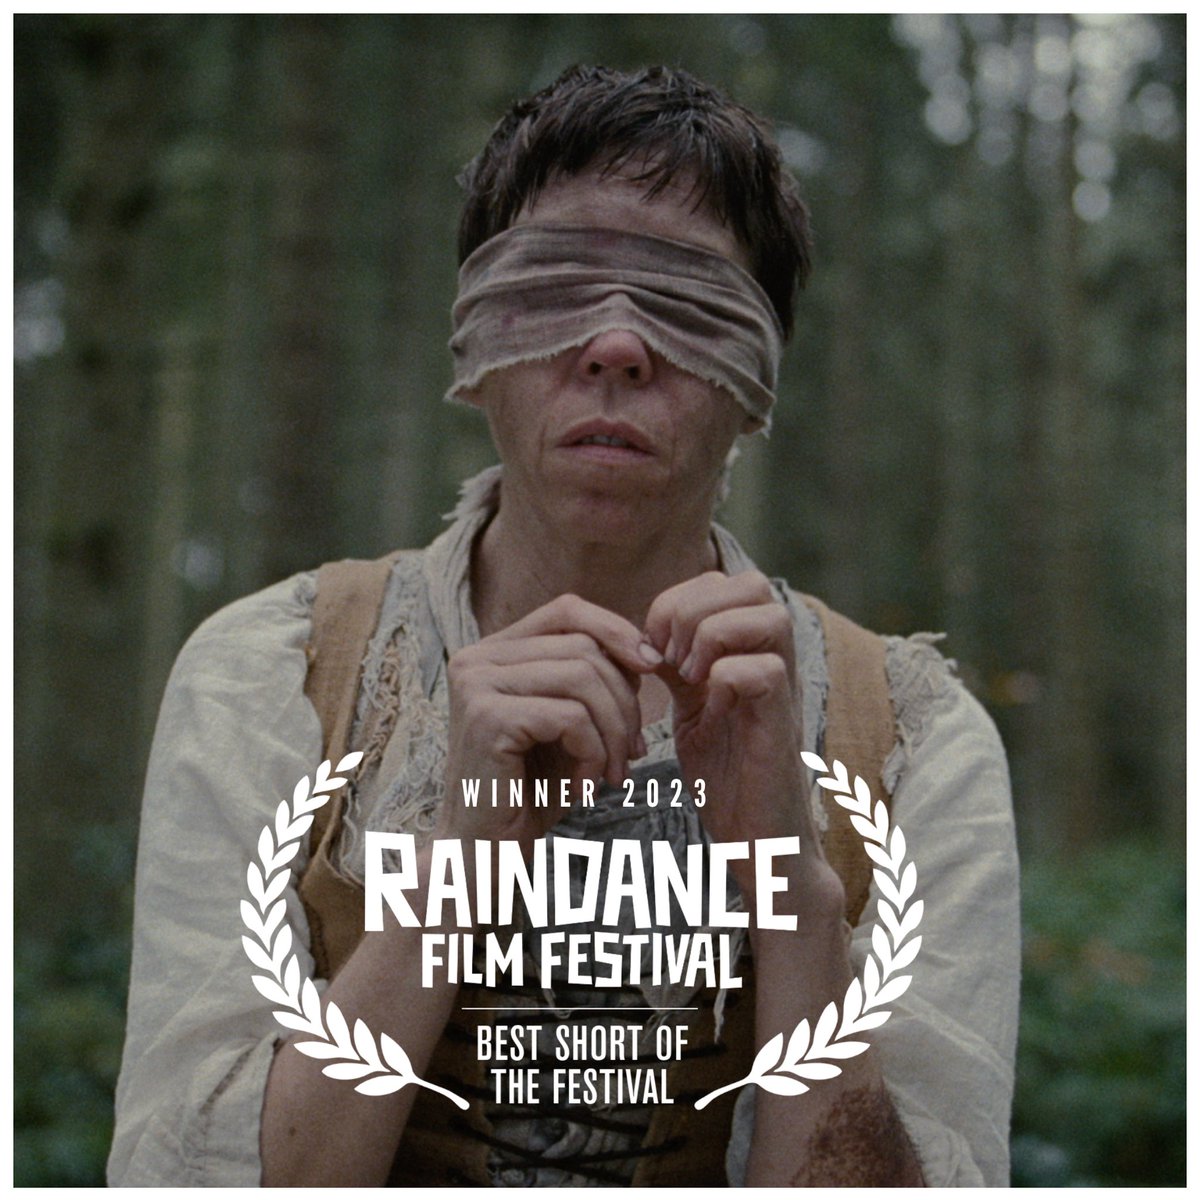 WE WON!! 🤯🤯🤯 Huge thank you to the entire team & jury @Raindance for this incredible honour! @TheGoldenWest_ - Best Short of the Festival - #Raindance2023 #OscarQualifying ⛏️🫏🏔️